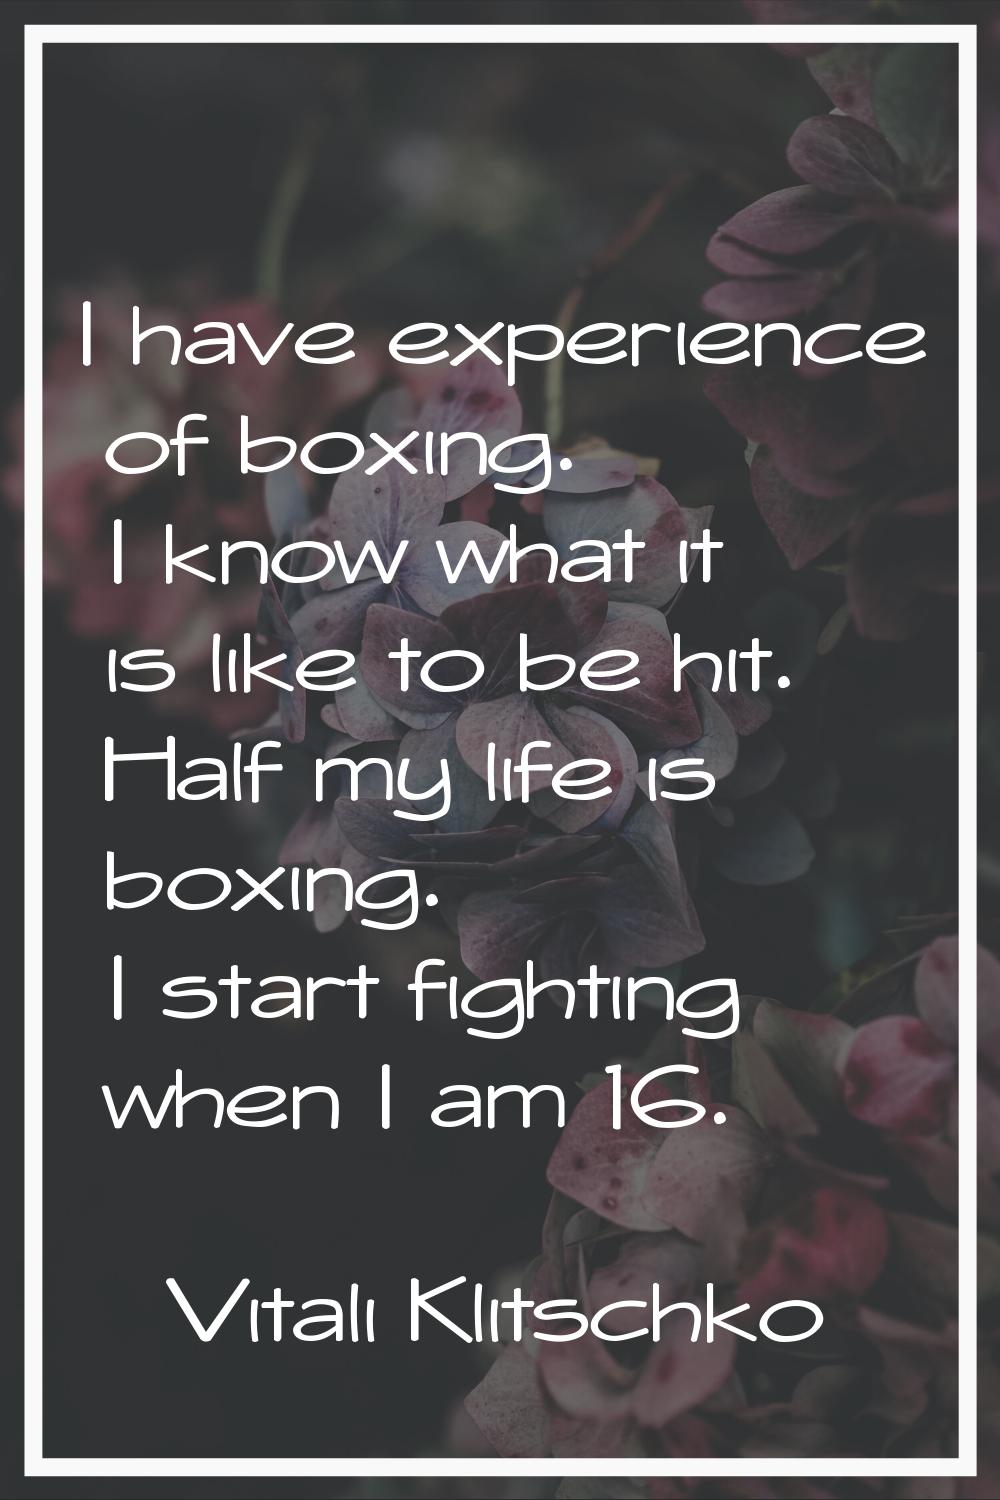 I have experience of boxing. I know what it is like to be hit. Half my life is boxing. I start figh